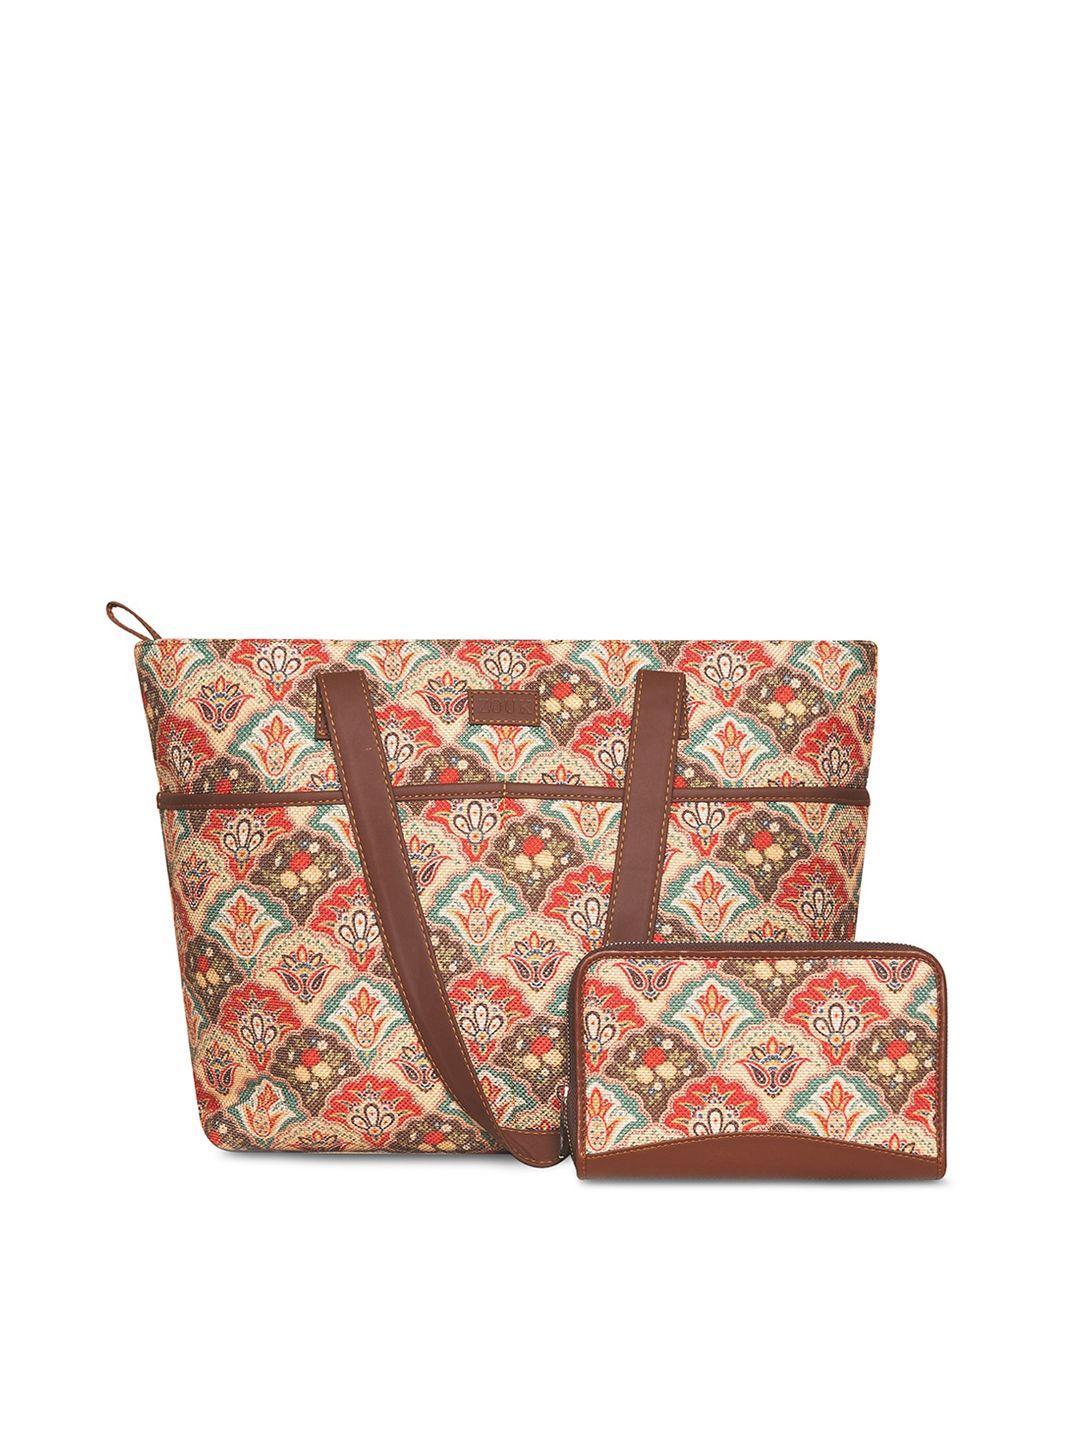 zouk multicoloured floral printed structured sling bag